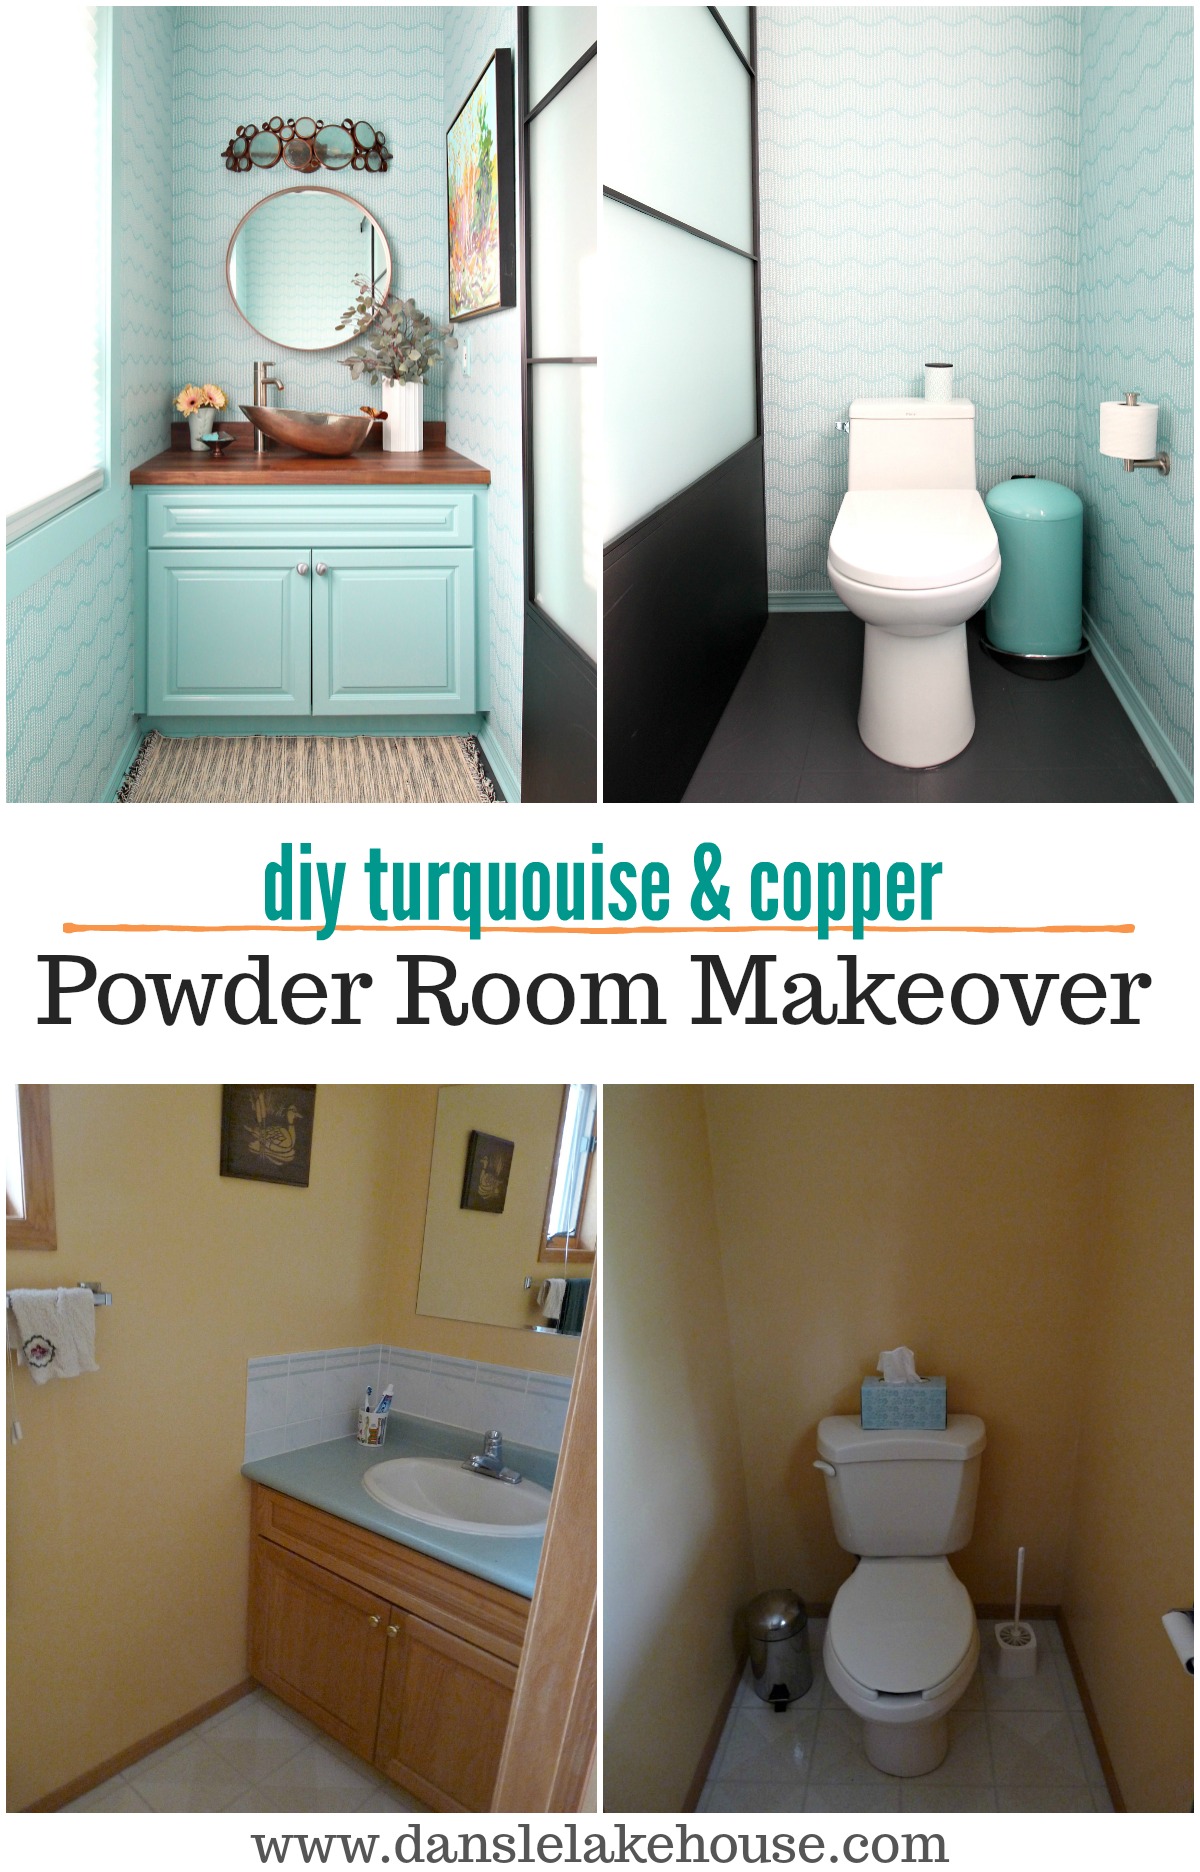 Copper & Turquoise DIY Powder Room Makeover